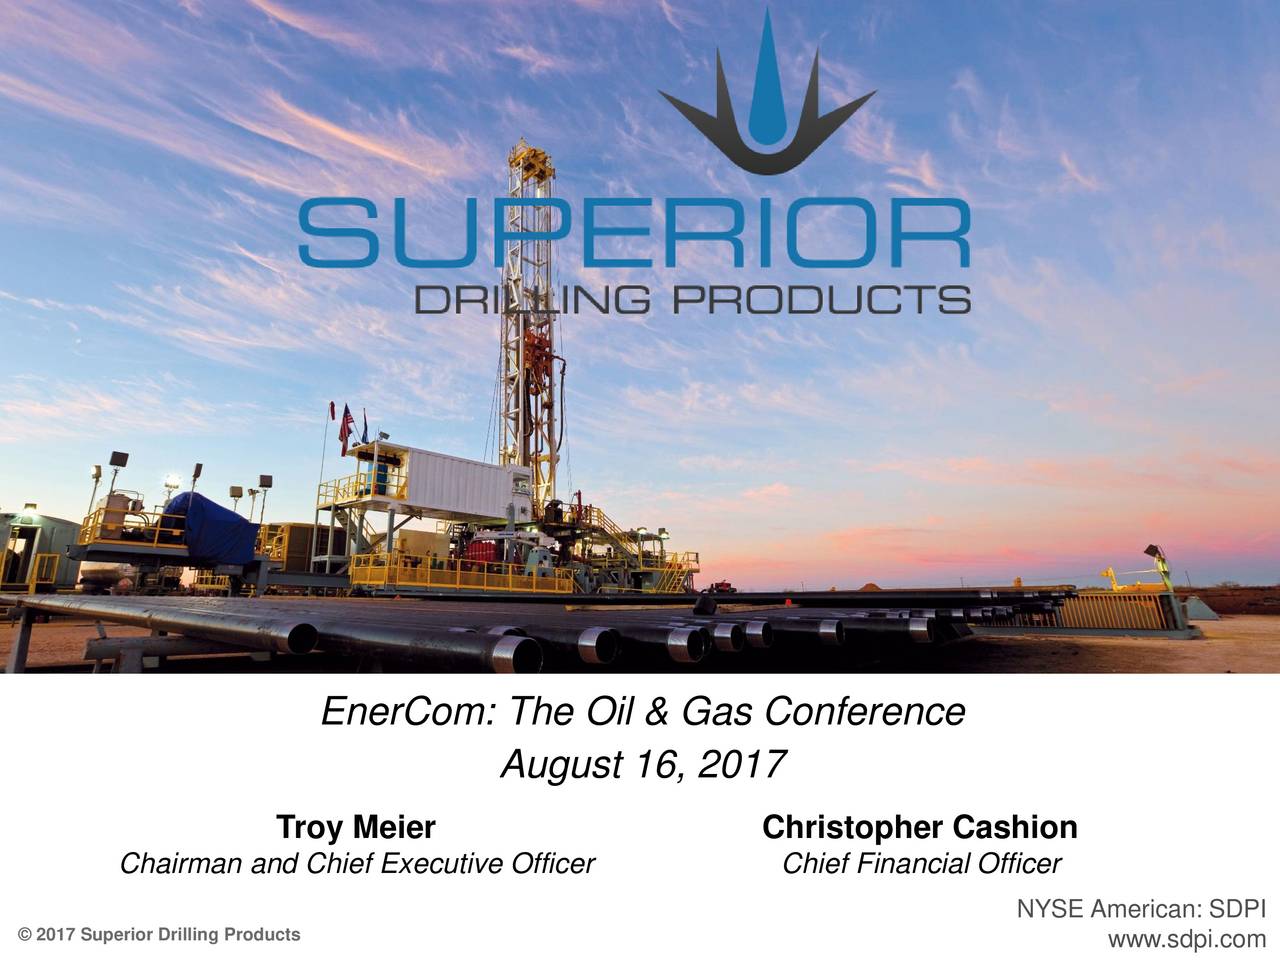 Superior Drilling Products (SDPI) Presents At Oil & Gas